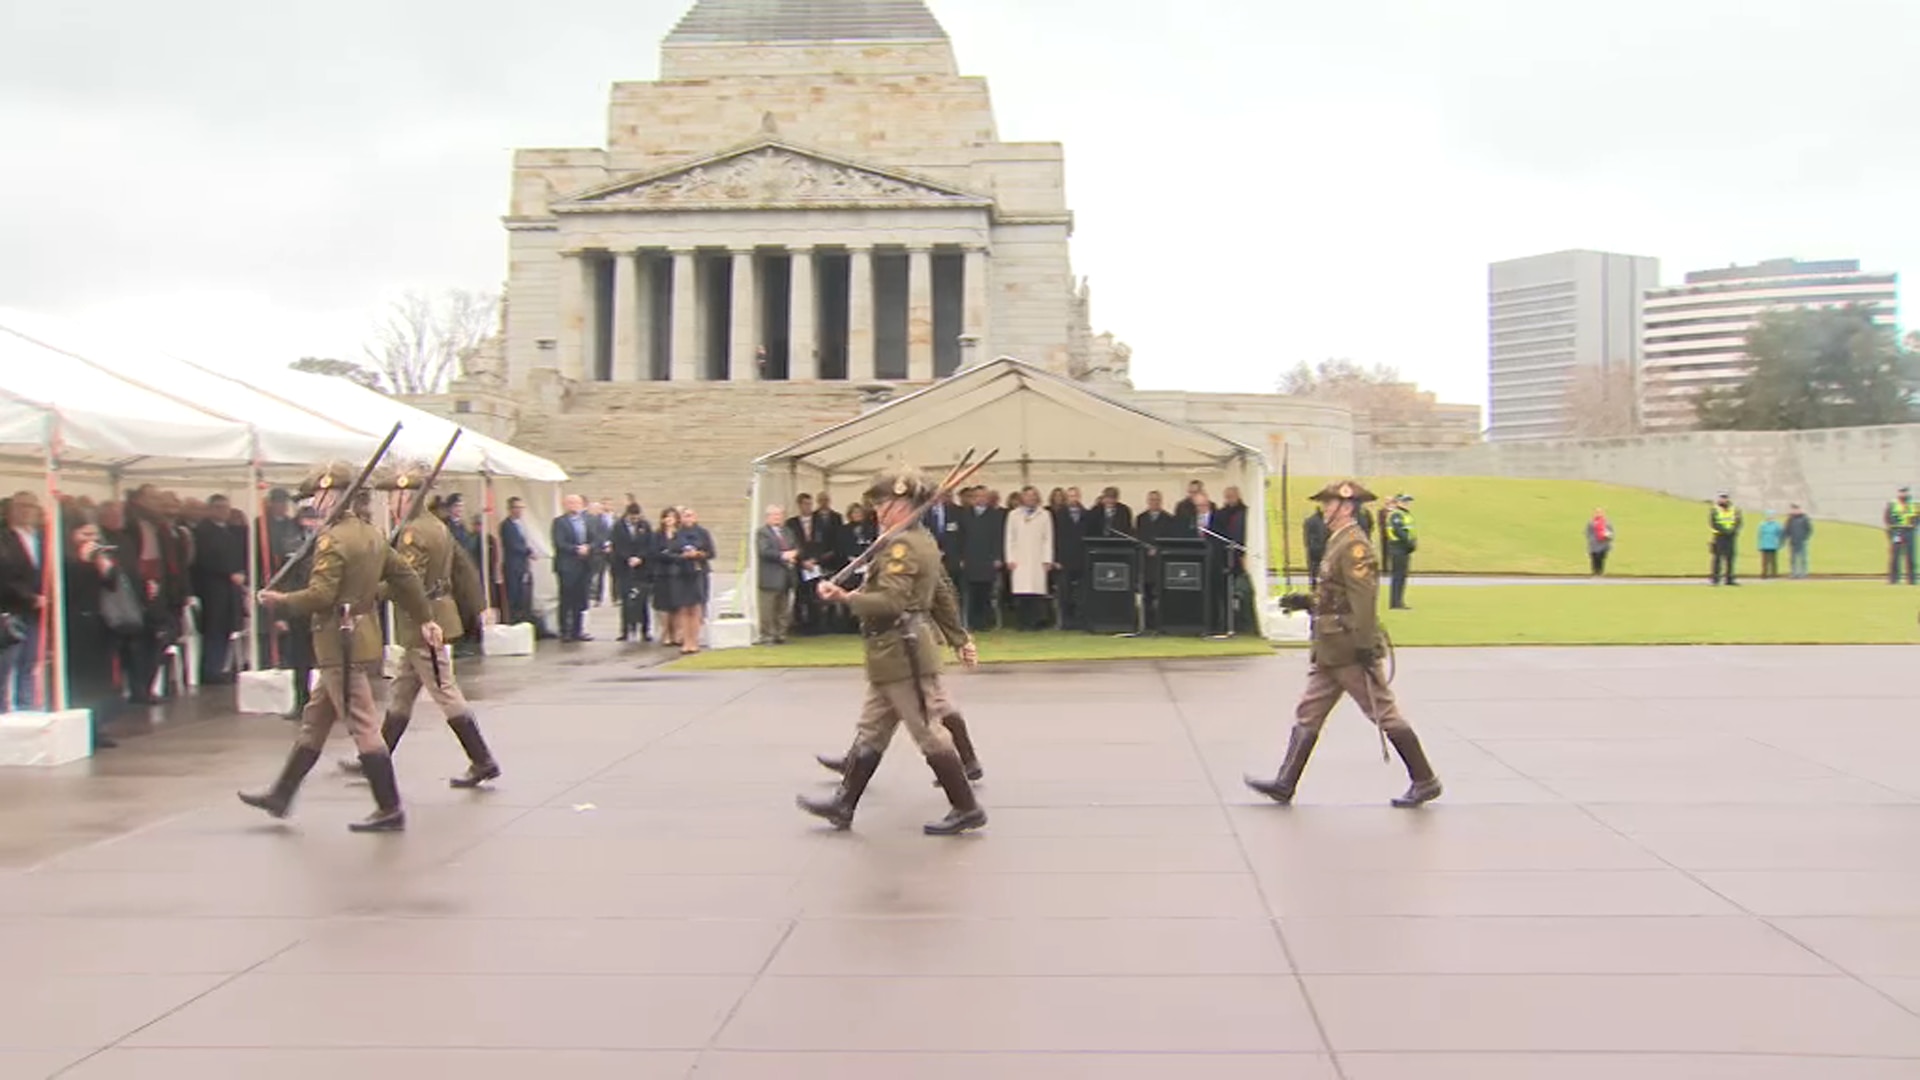 The ceremony at Melbourne's Shrine of Remembrance marked the seventy-seventh anniversary of the Tobruk defence.